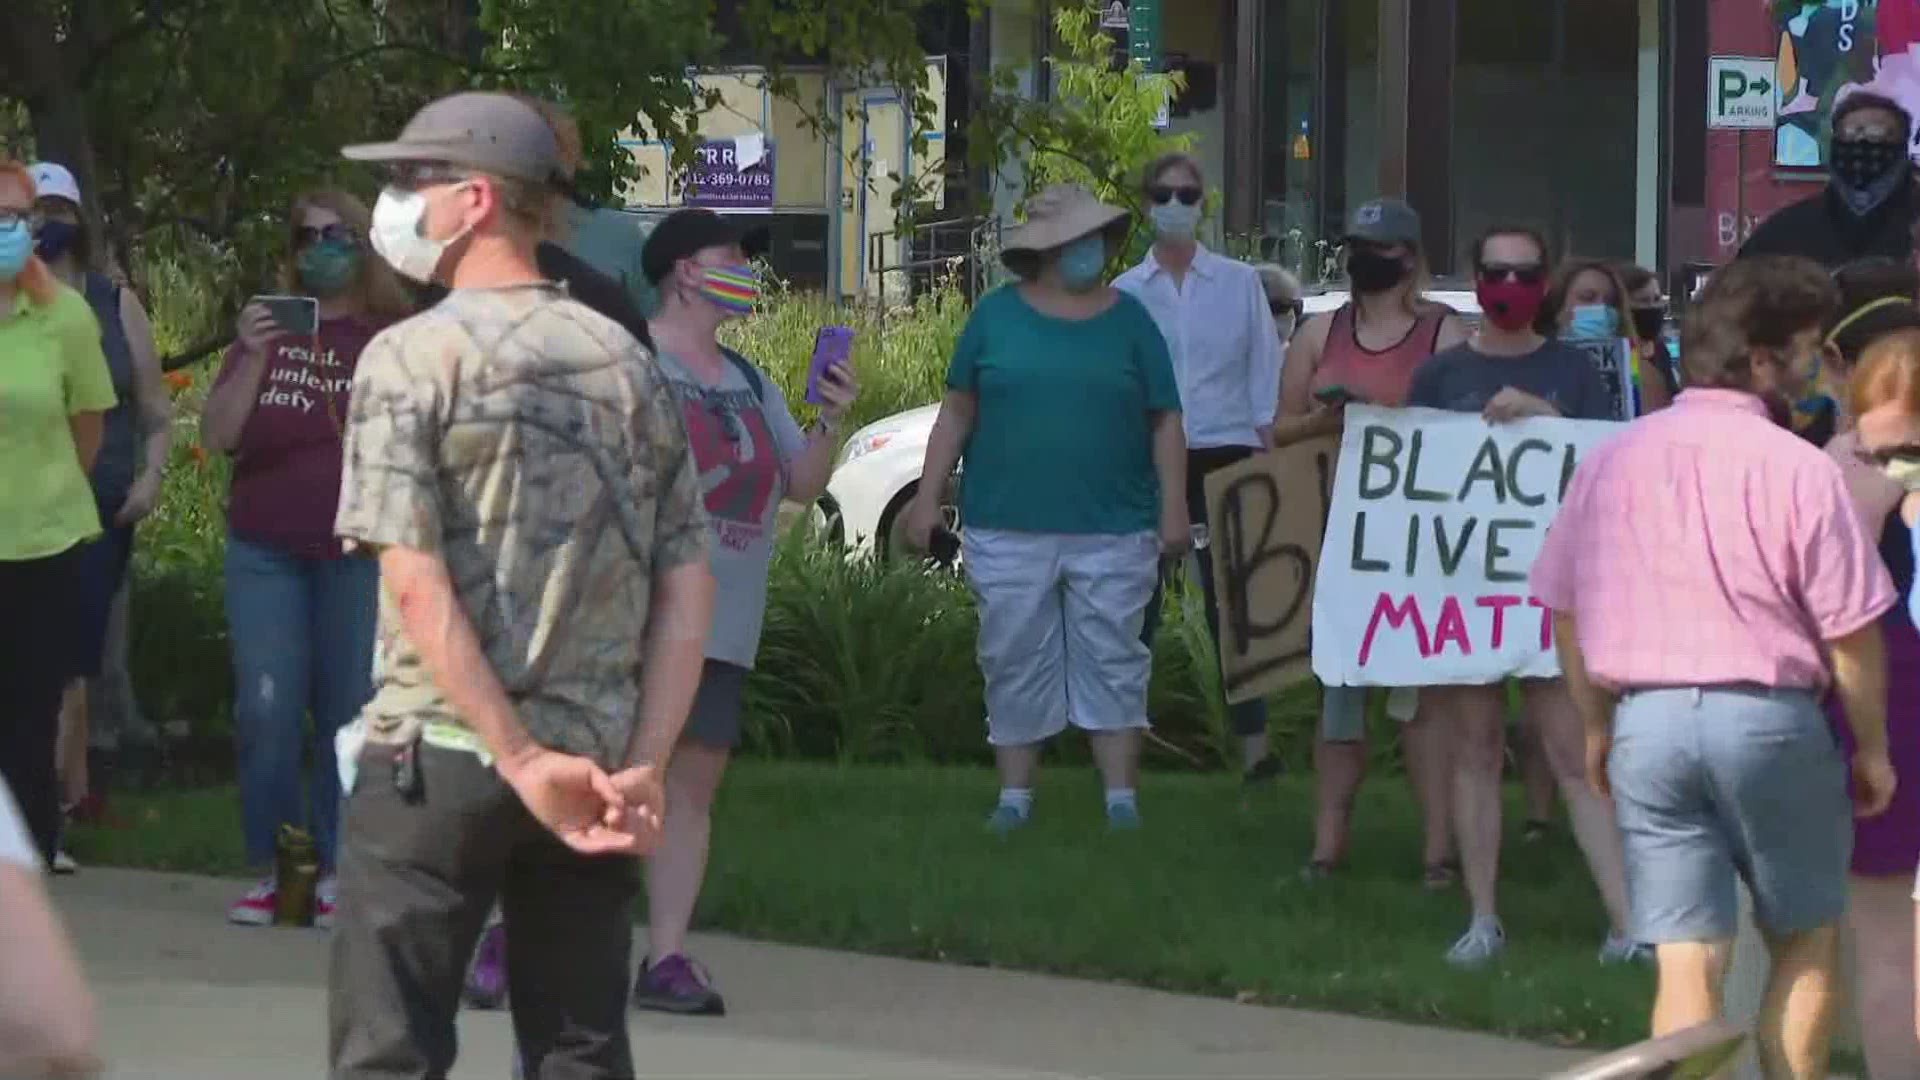 Protesters in Bloomington say they want the men seen in that now viral video on social media held accountable for attacking Vauhxx Booker.